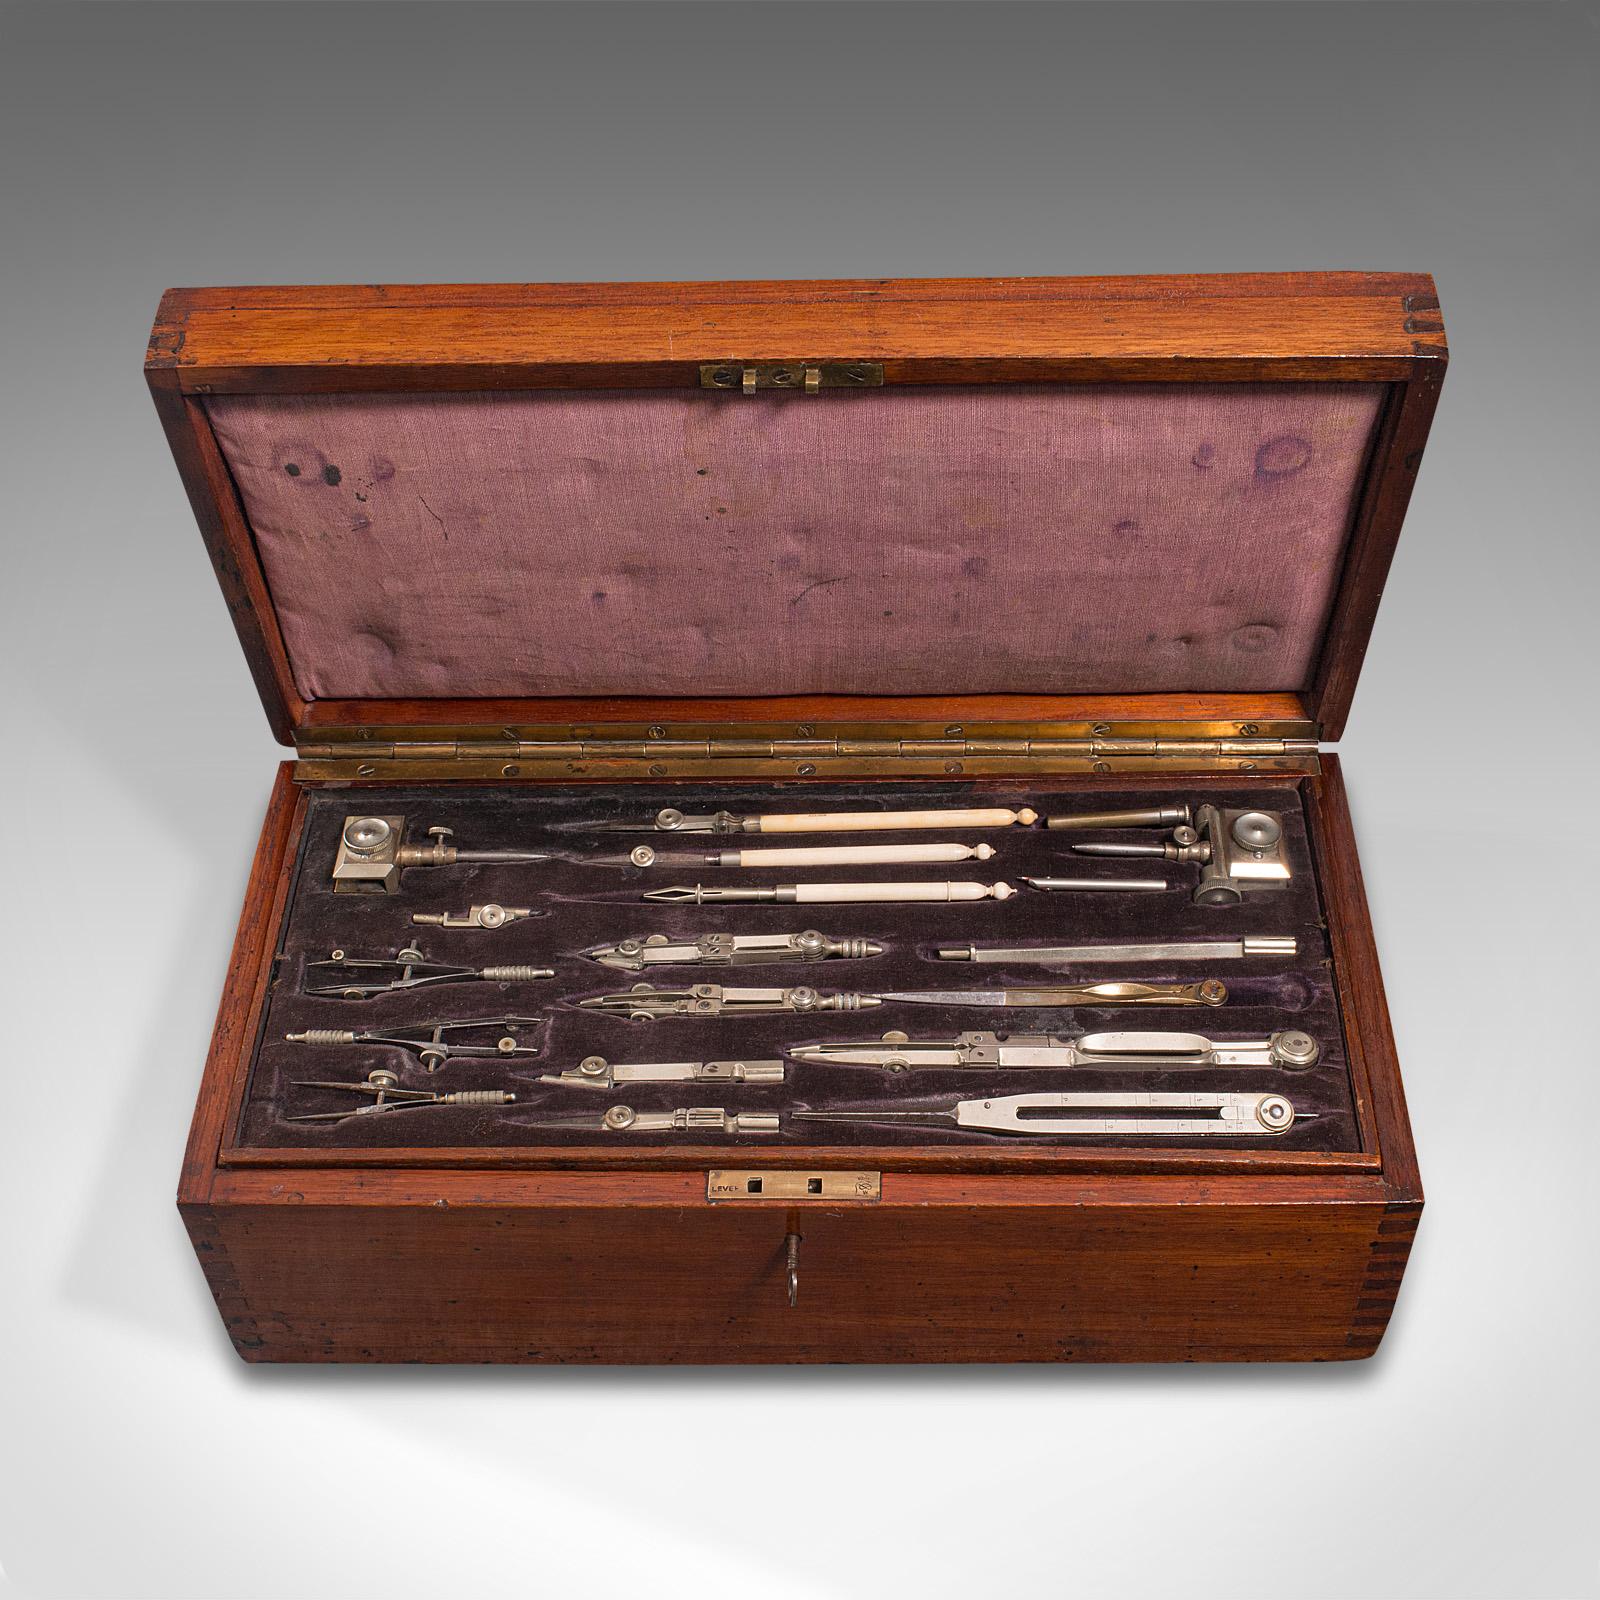 This is an antique cased draughtsman's set. An English, desktop collection of silver nickel, celluloid and brass drawing tools, dating to the Edwardian period, circa 1910.

Delightfully presented instruments for the master draughtsman
Displaying